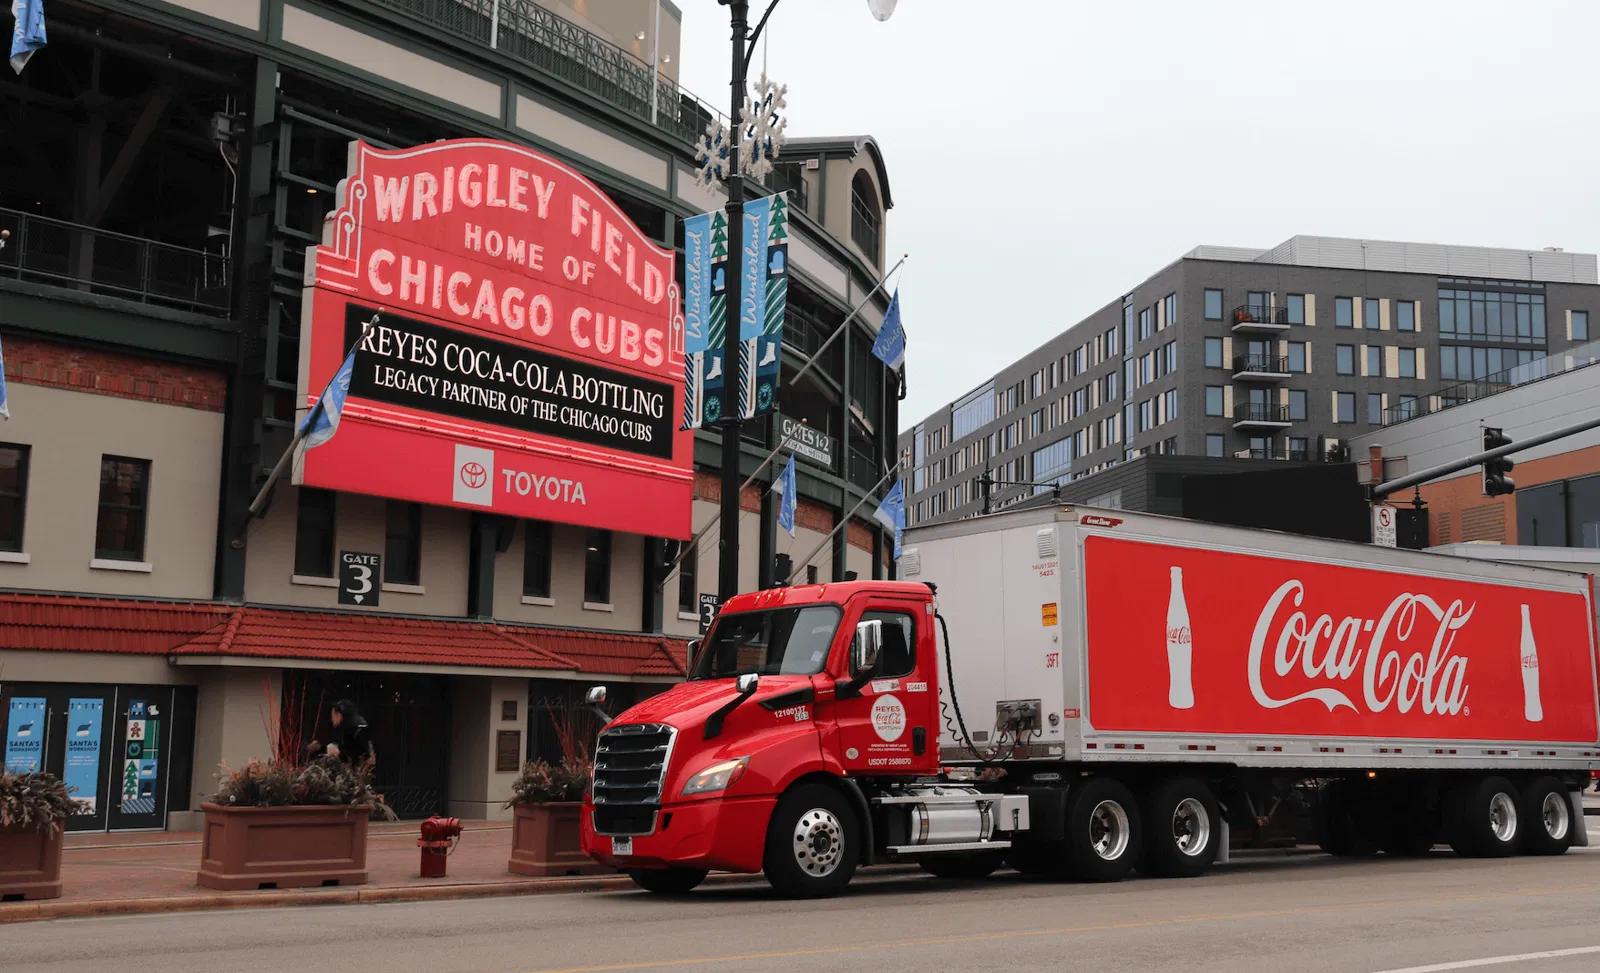 Coca-Cola truck parked in front of "Wrigley Field" building